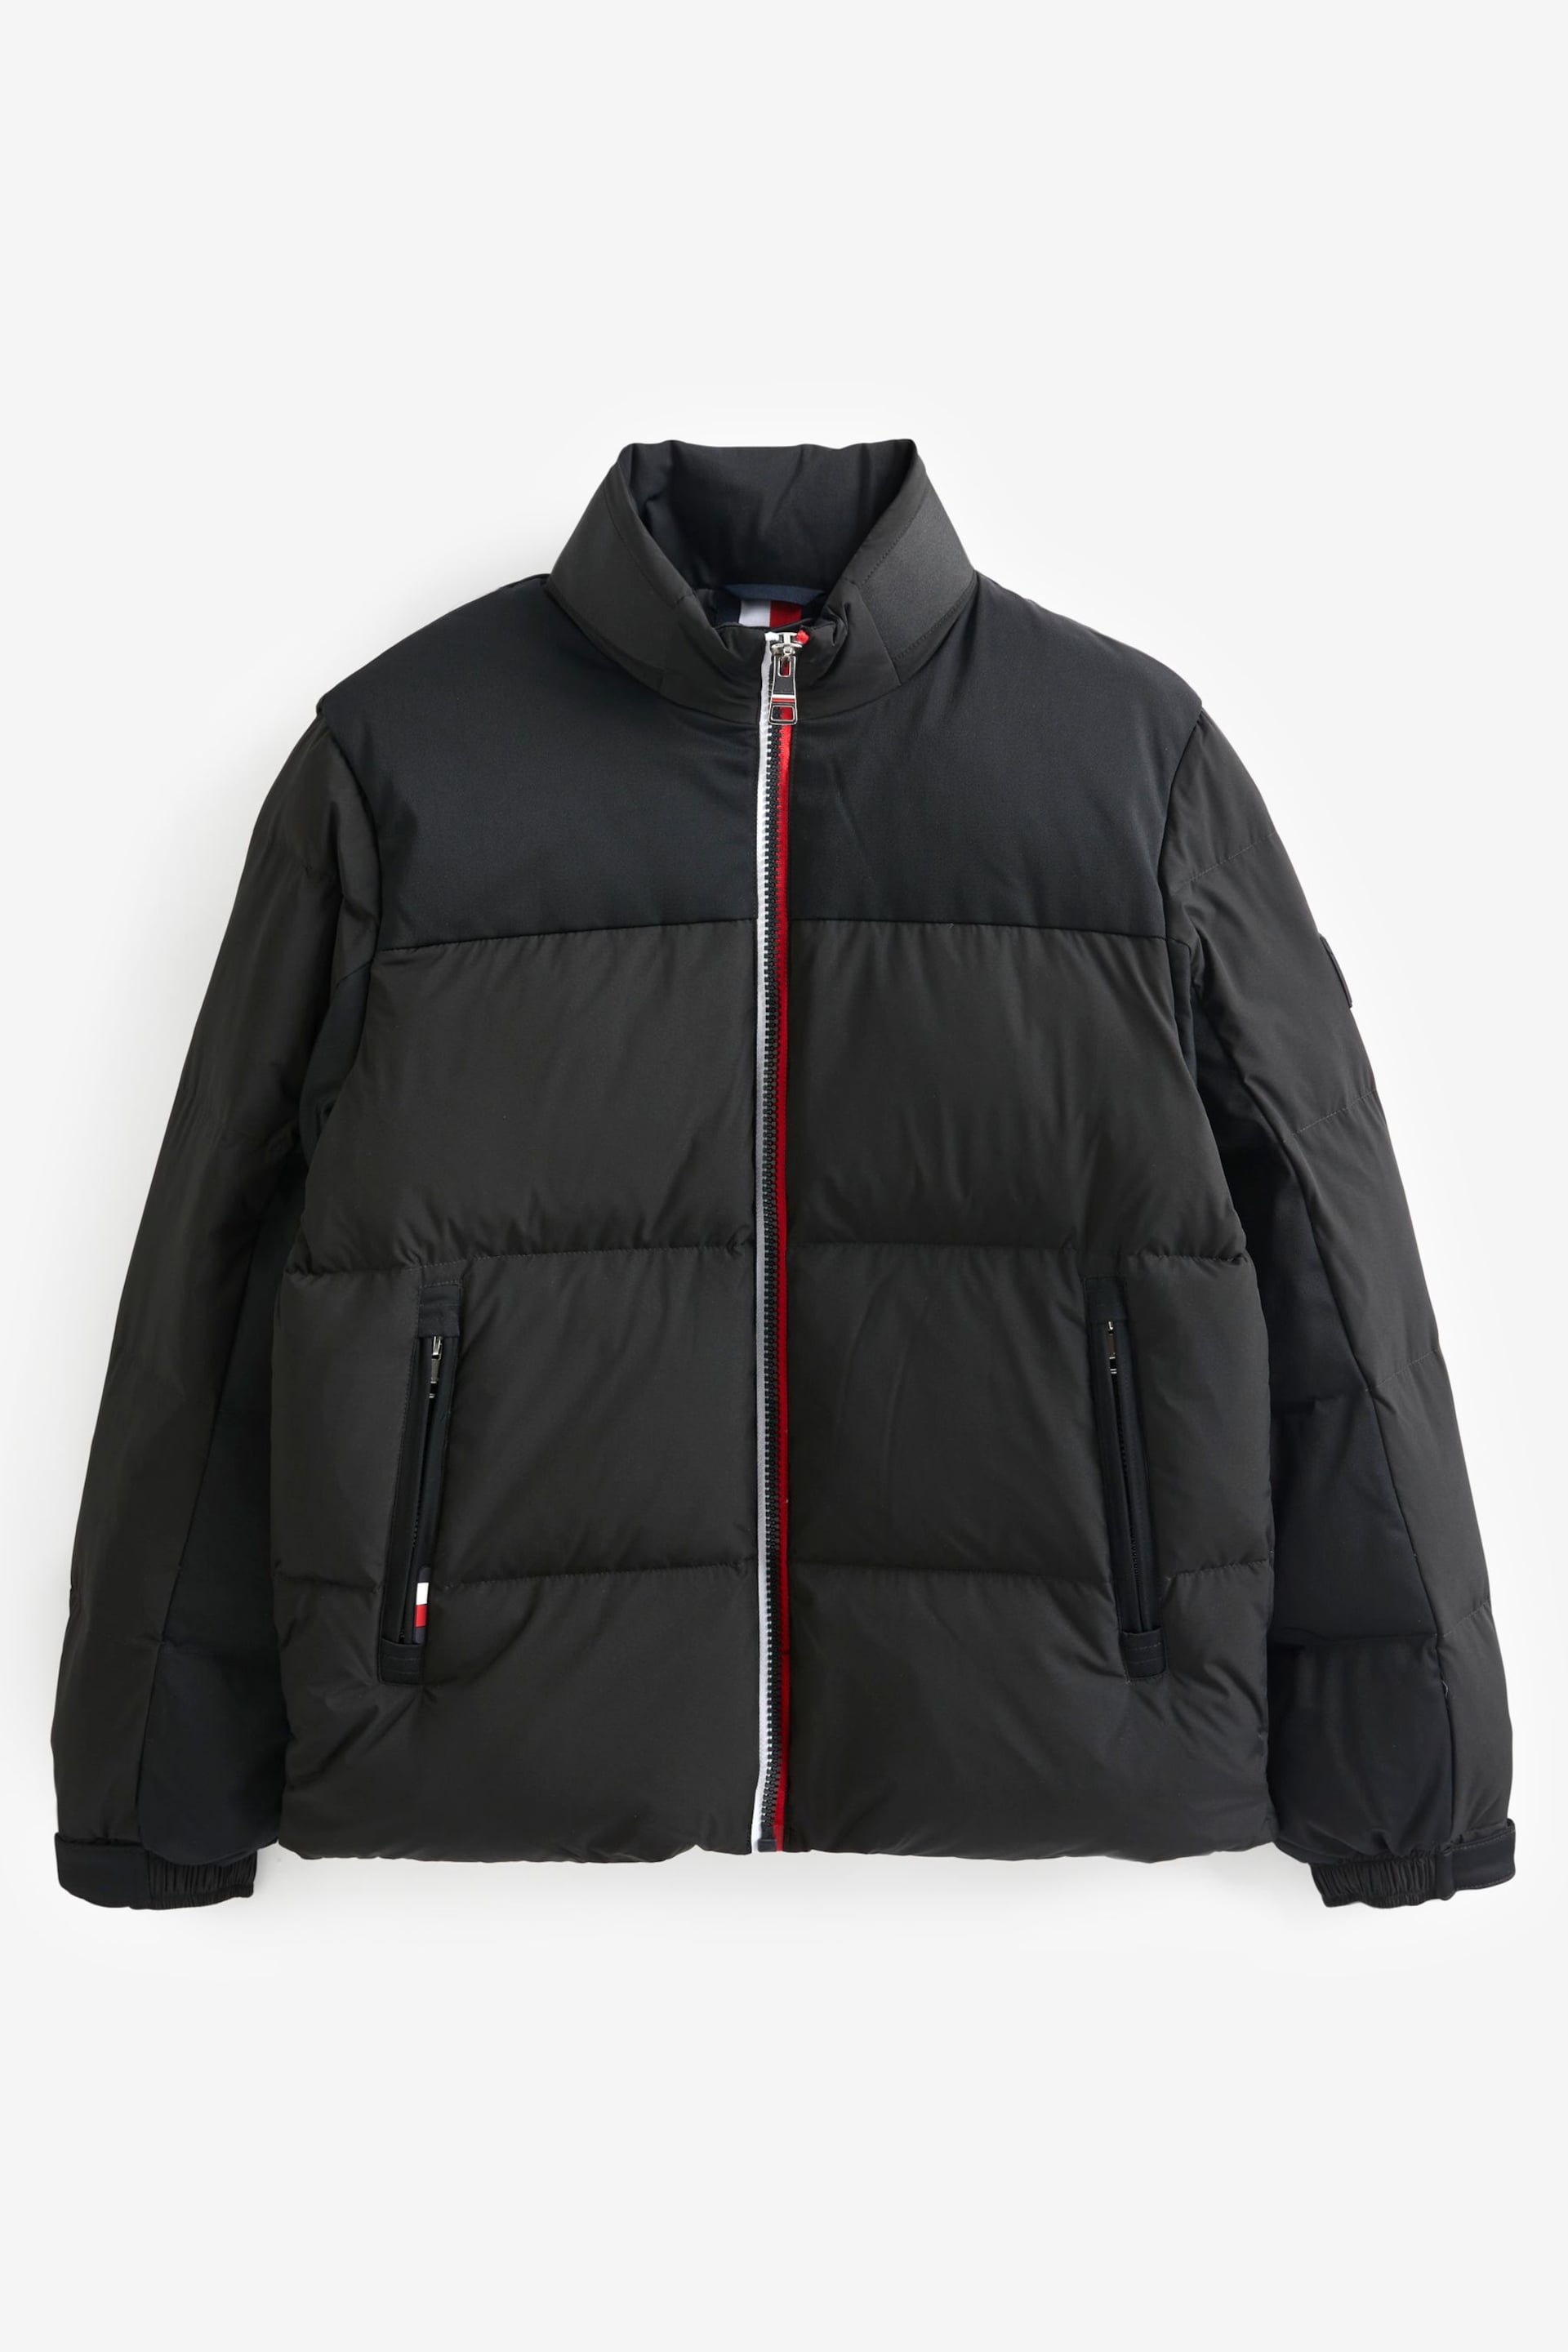 Tommy Hilfiger New York Down Puffer Black Jacket - Image 4 of 4